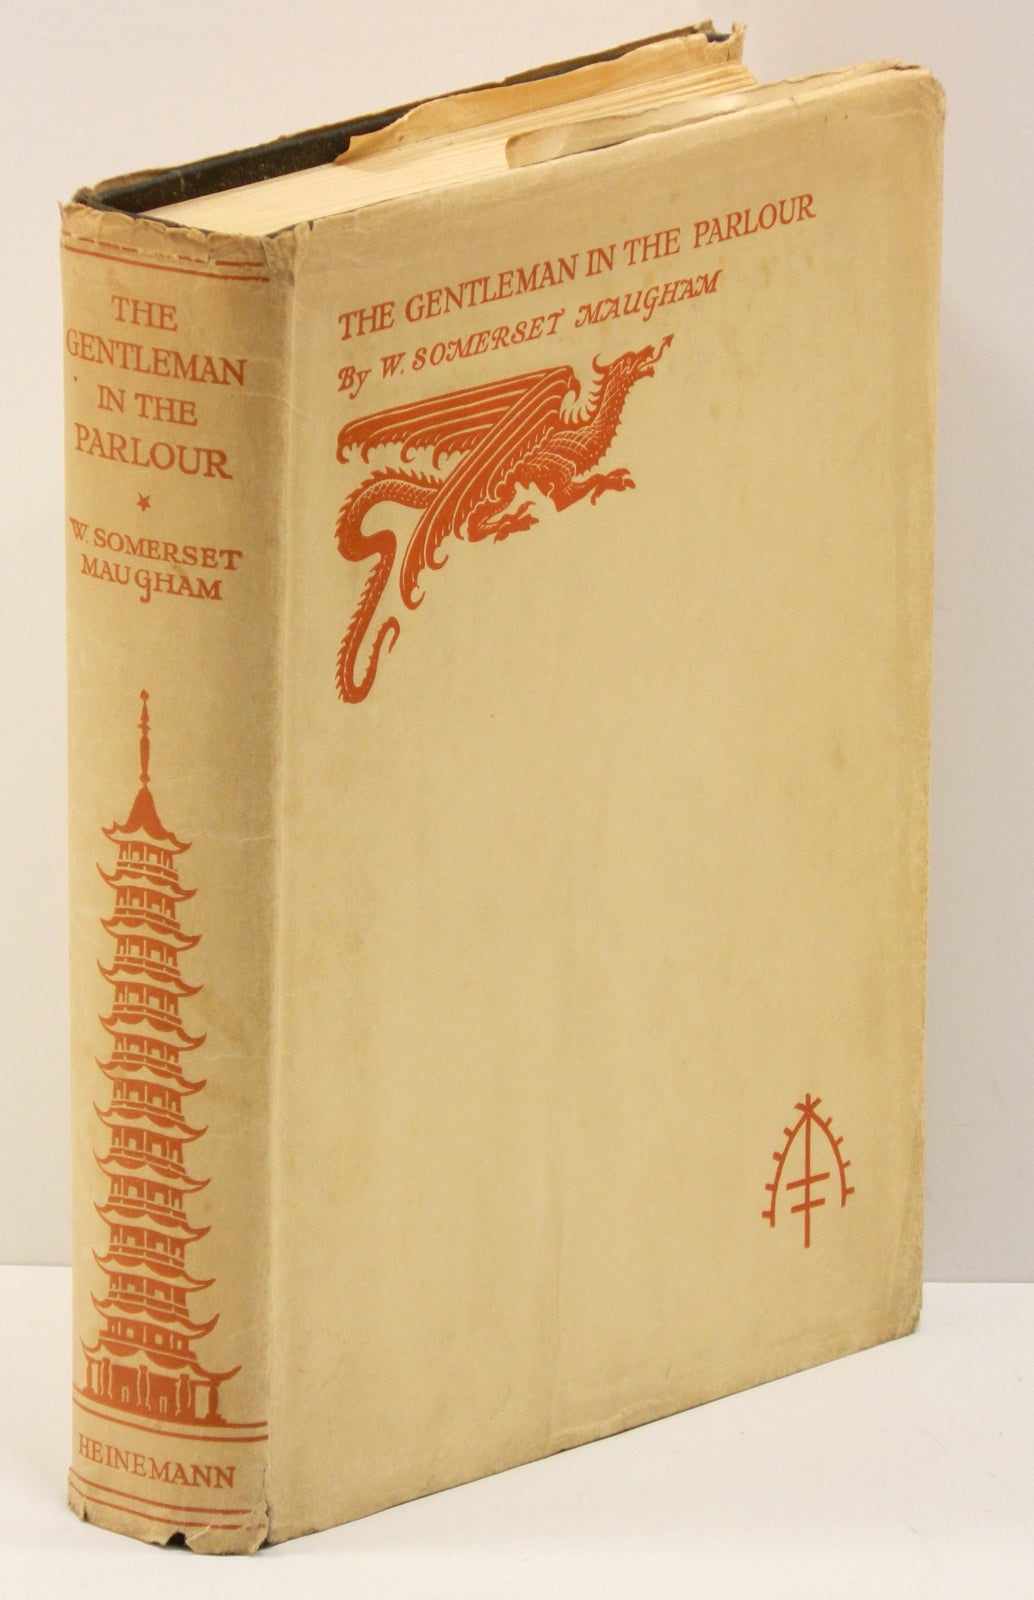 THE GENTLEMAN IN THE PARLOUR: A Record of a Journey from Rangoon to  Haiphong by W. Somerset Maugham on Quill & Brush, Inc